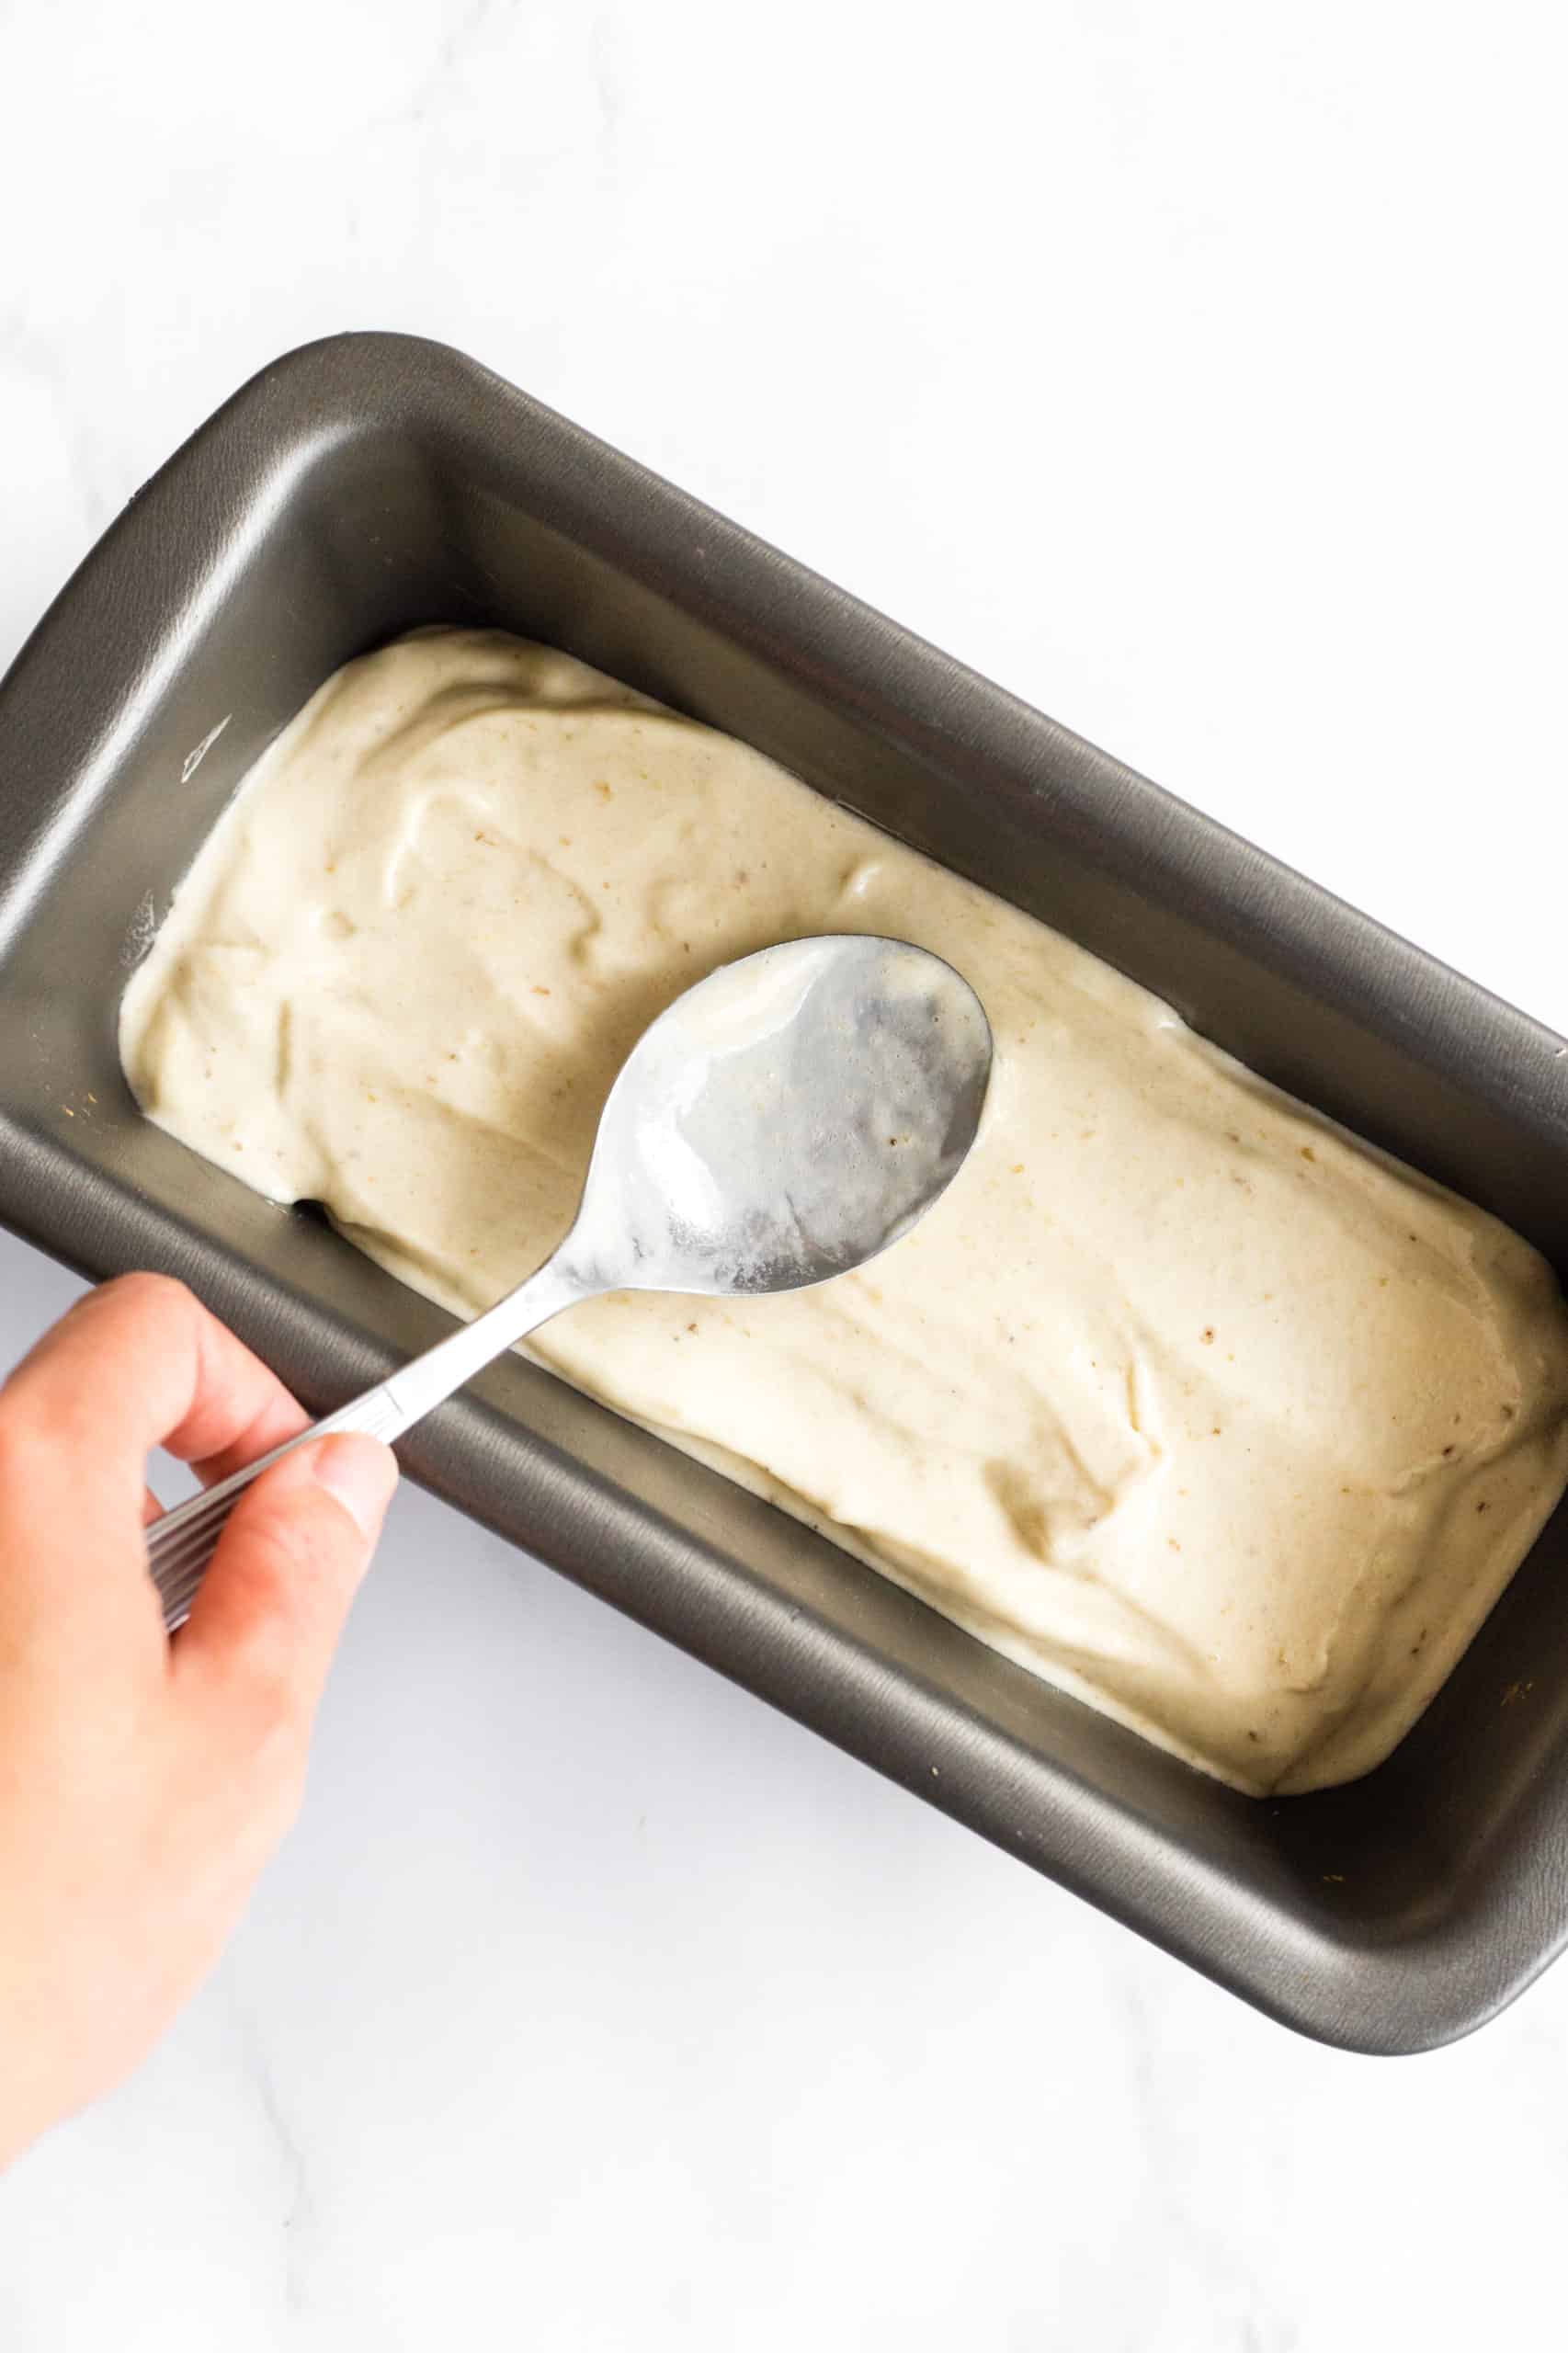 Using a spoon to spread out banana ice cream in a loaf pan to be frozen